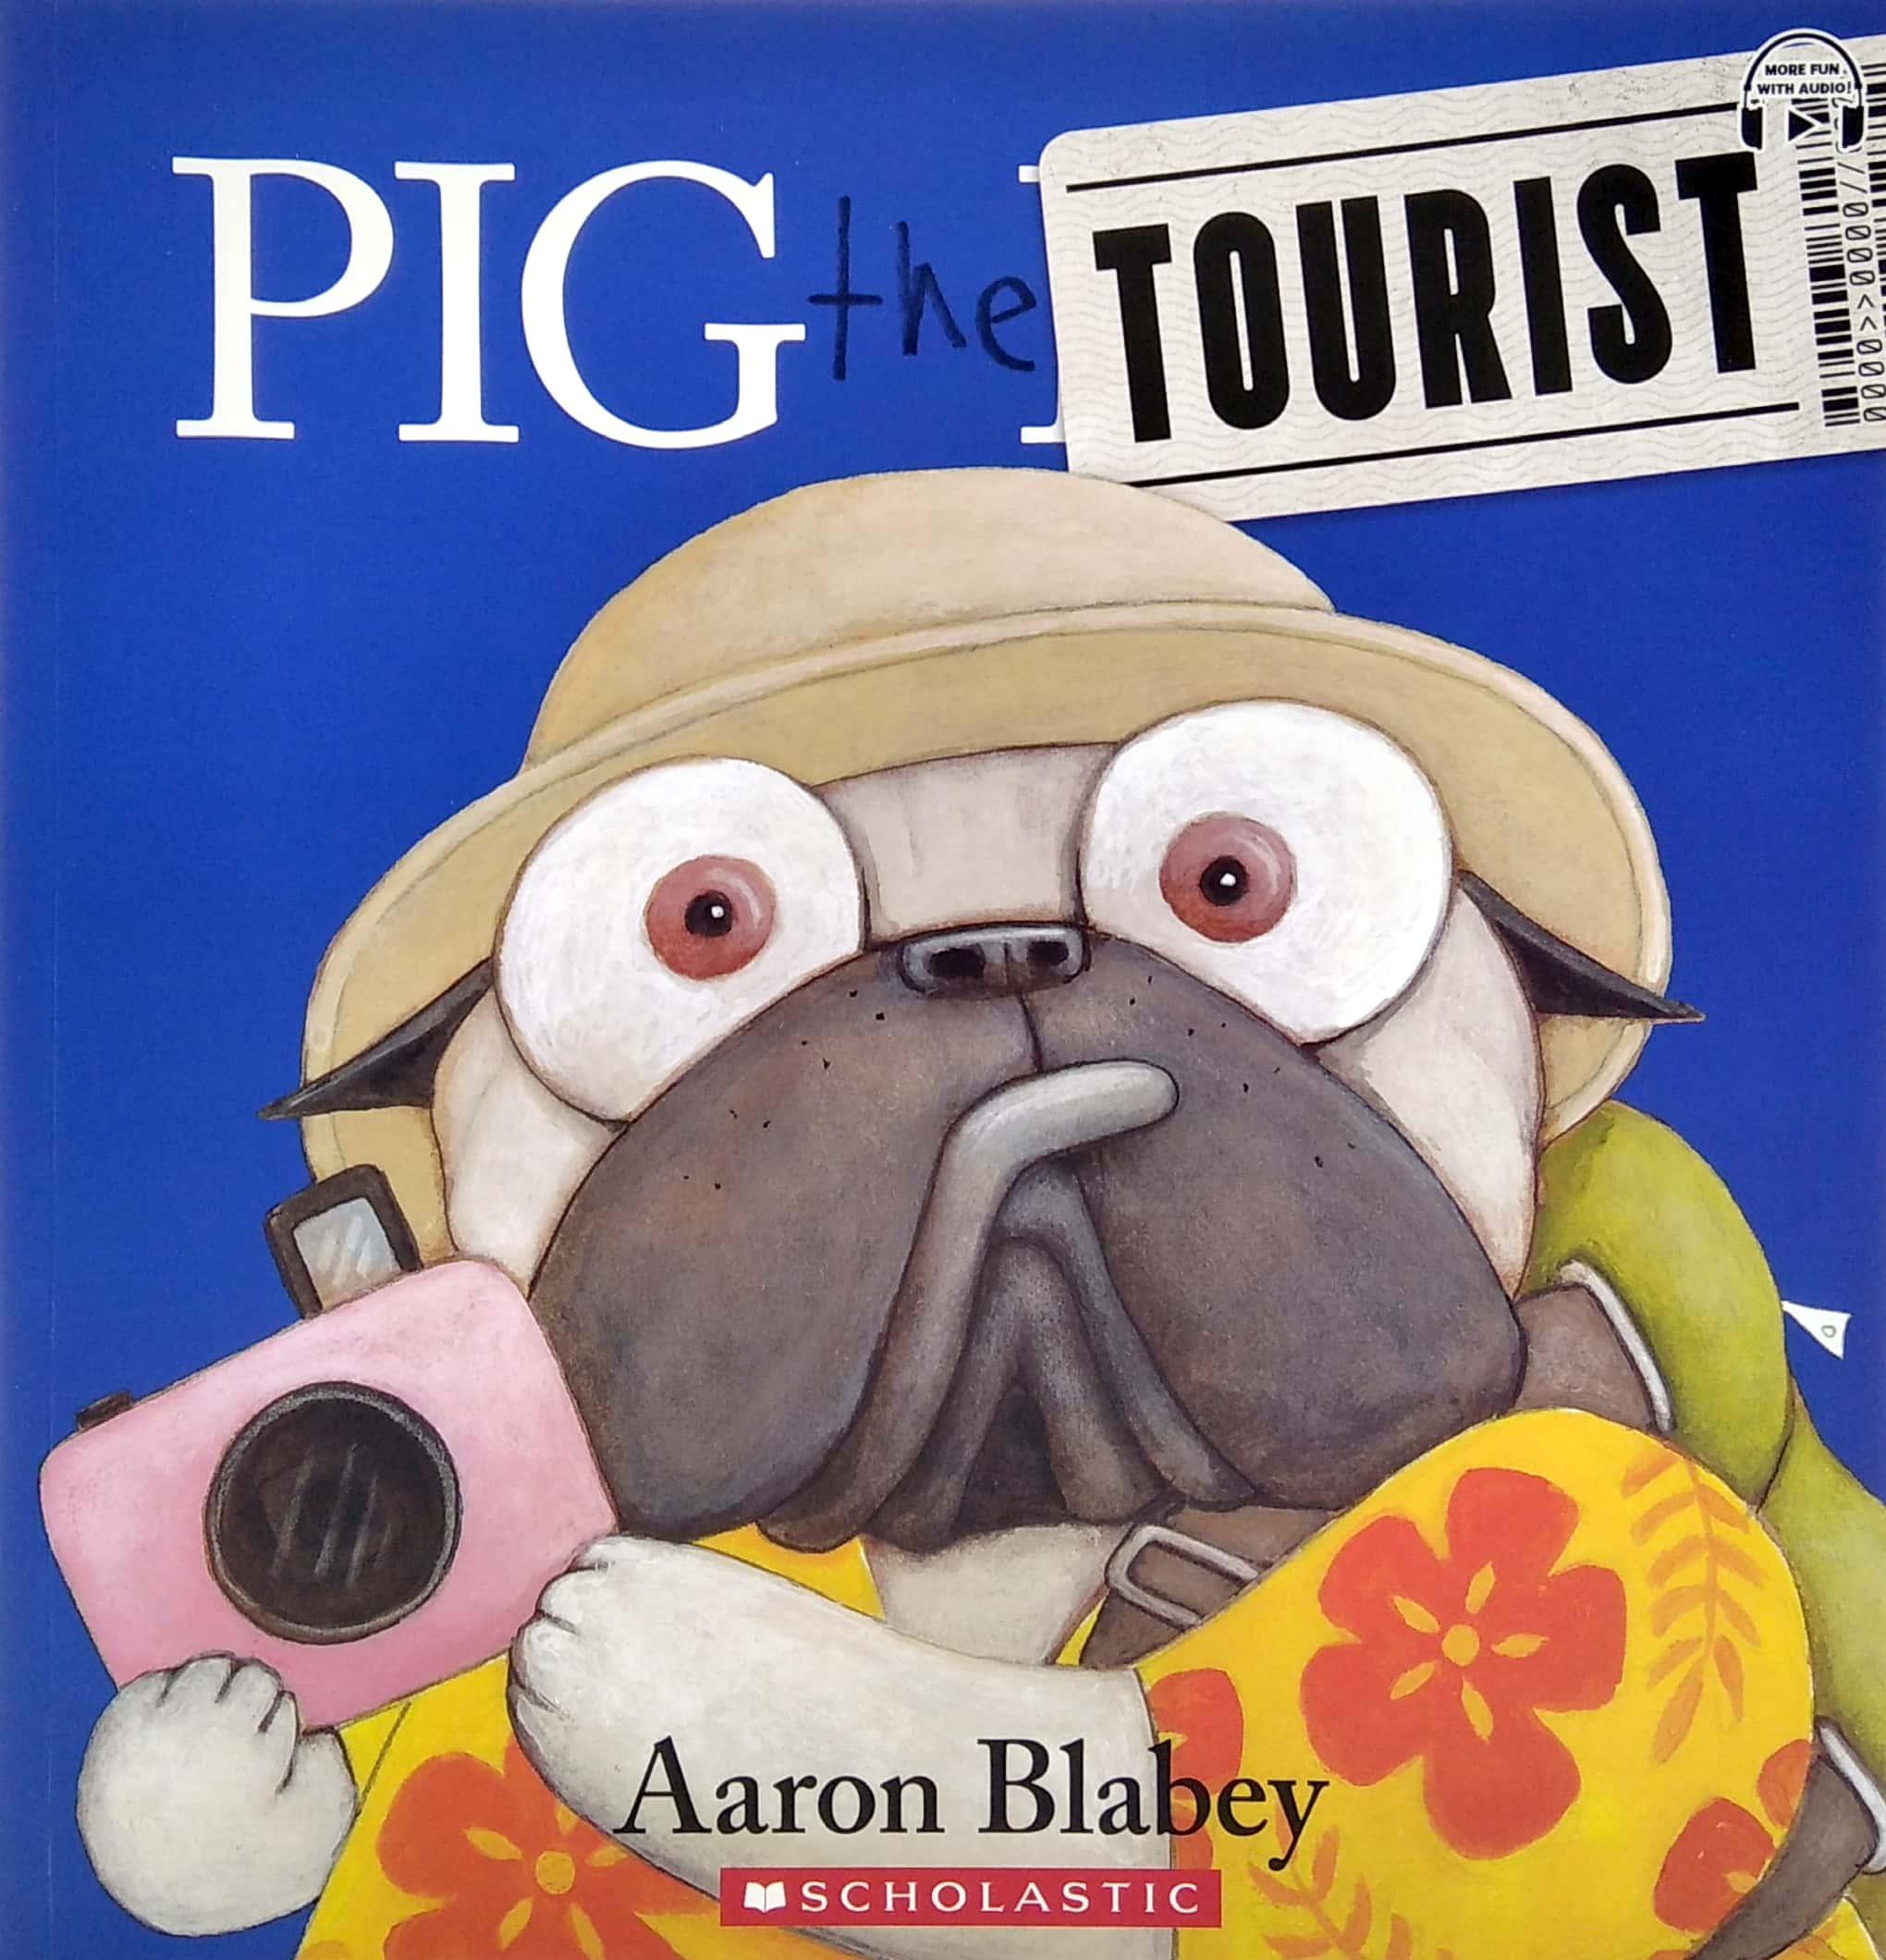 Pig The Tourist (With StoryPlus)